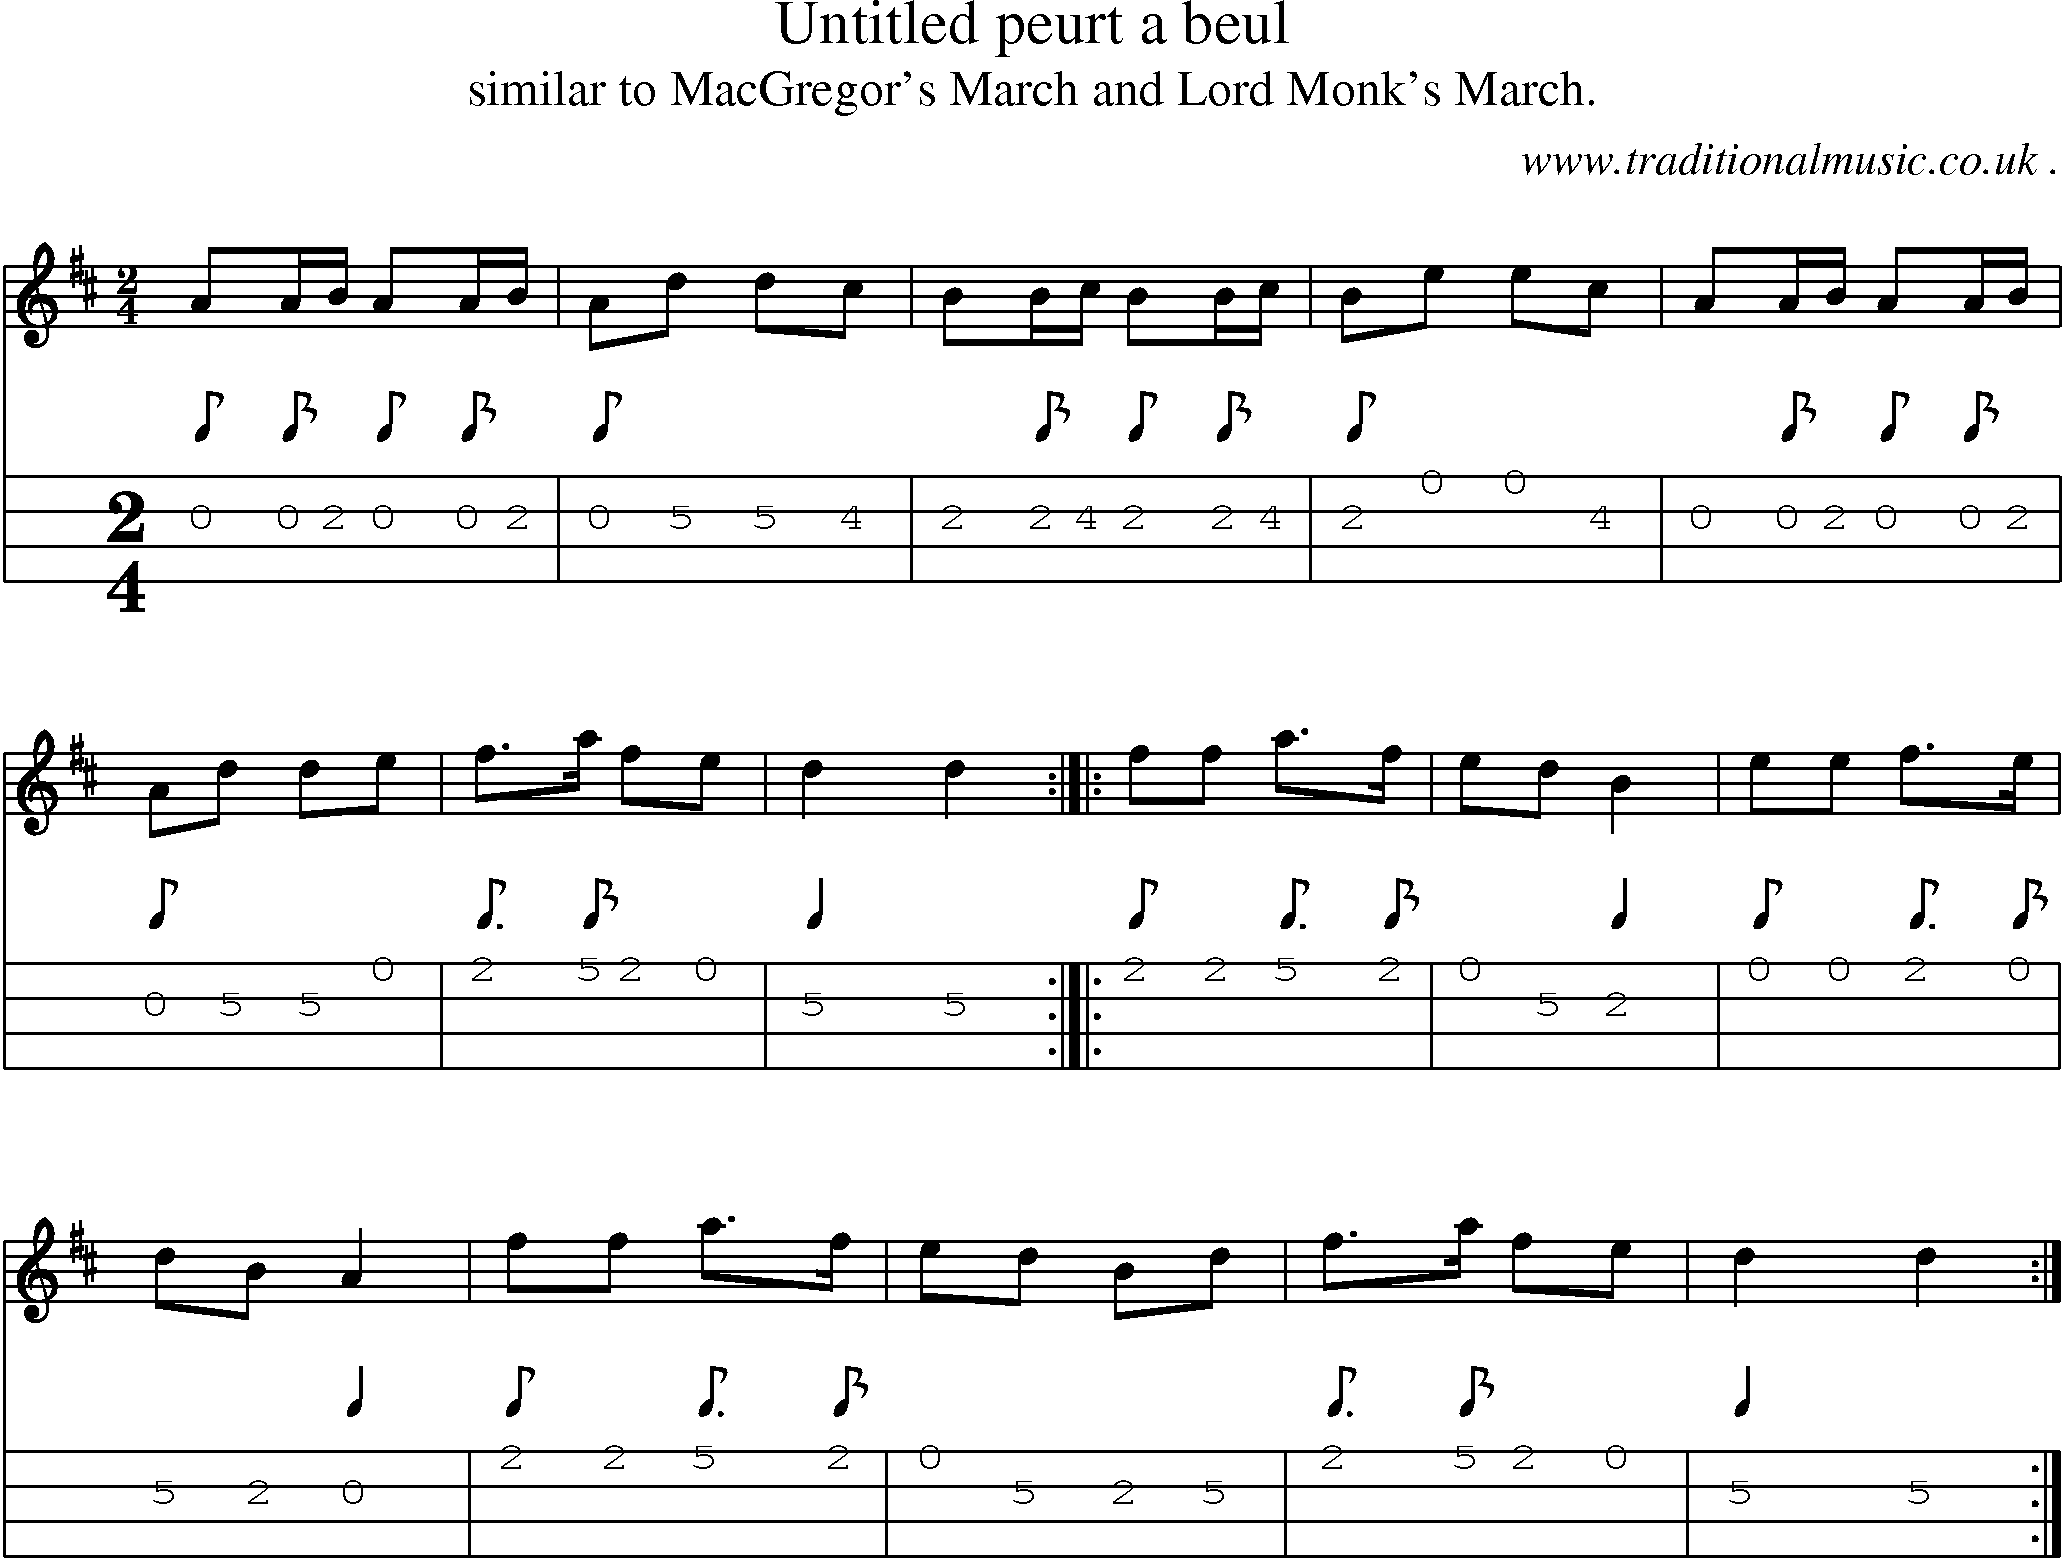 Sheet-music  score, Chords and Mandolin Tabs for Untitled Peurt A Beul